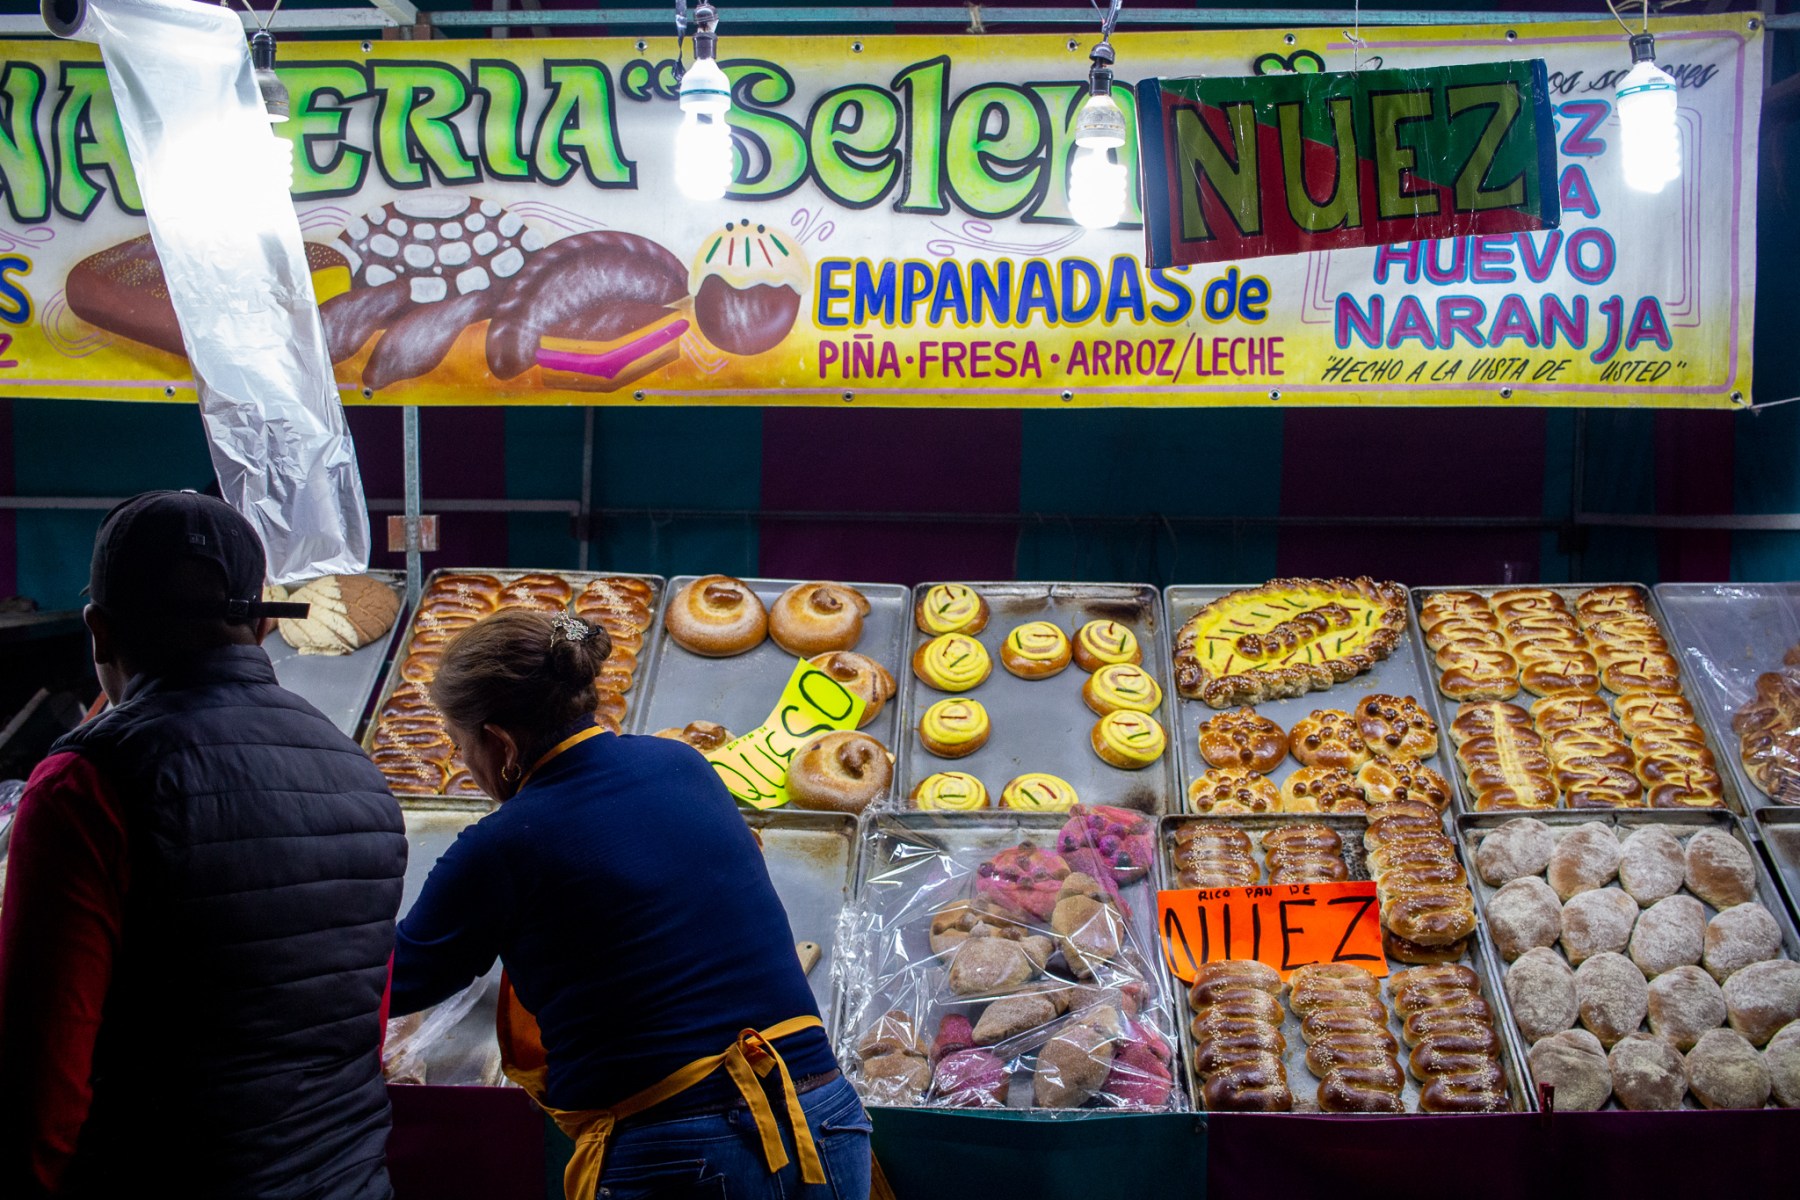 The area outside of the cemetery takes on an almost county fair-like quality, with vendors selling food like Pan de Muerto, a special type of bread eaten during the holiday.